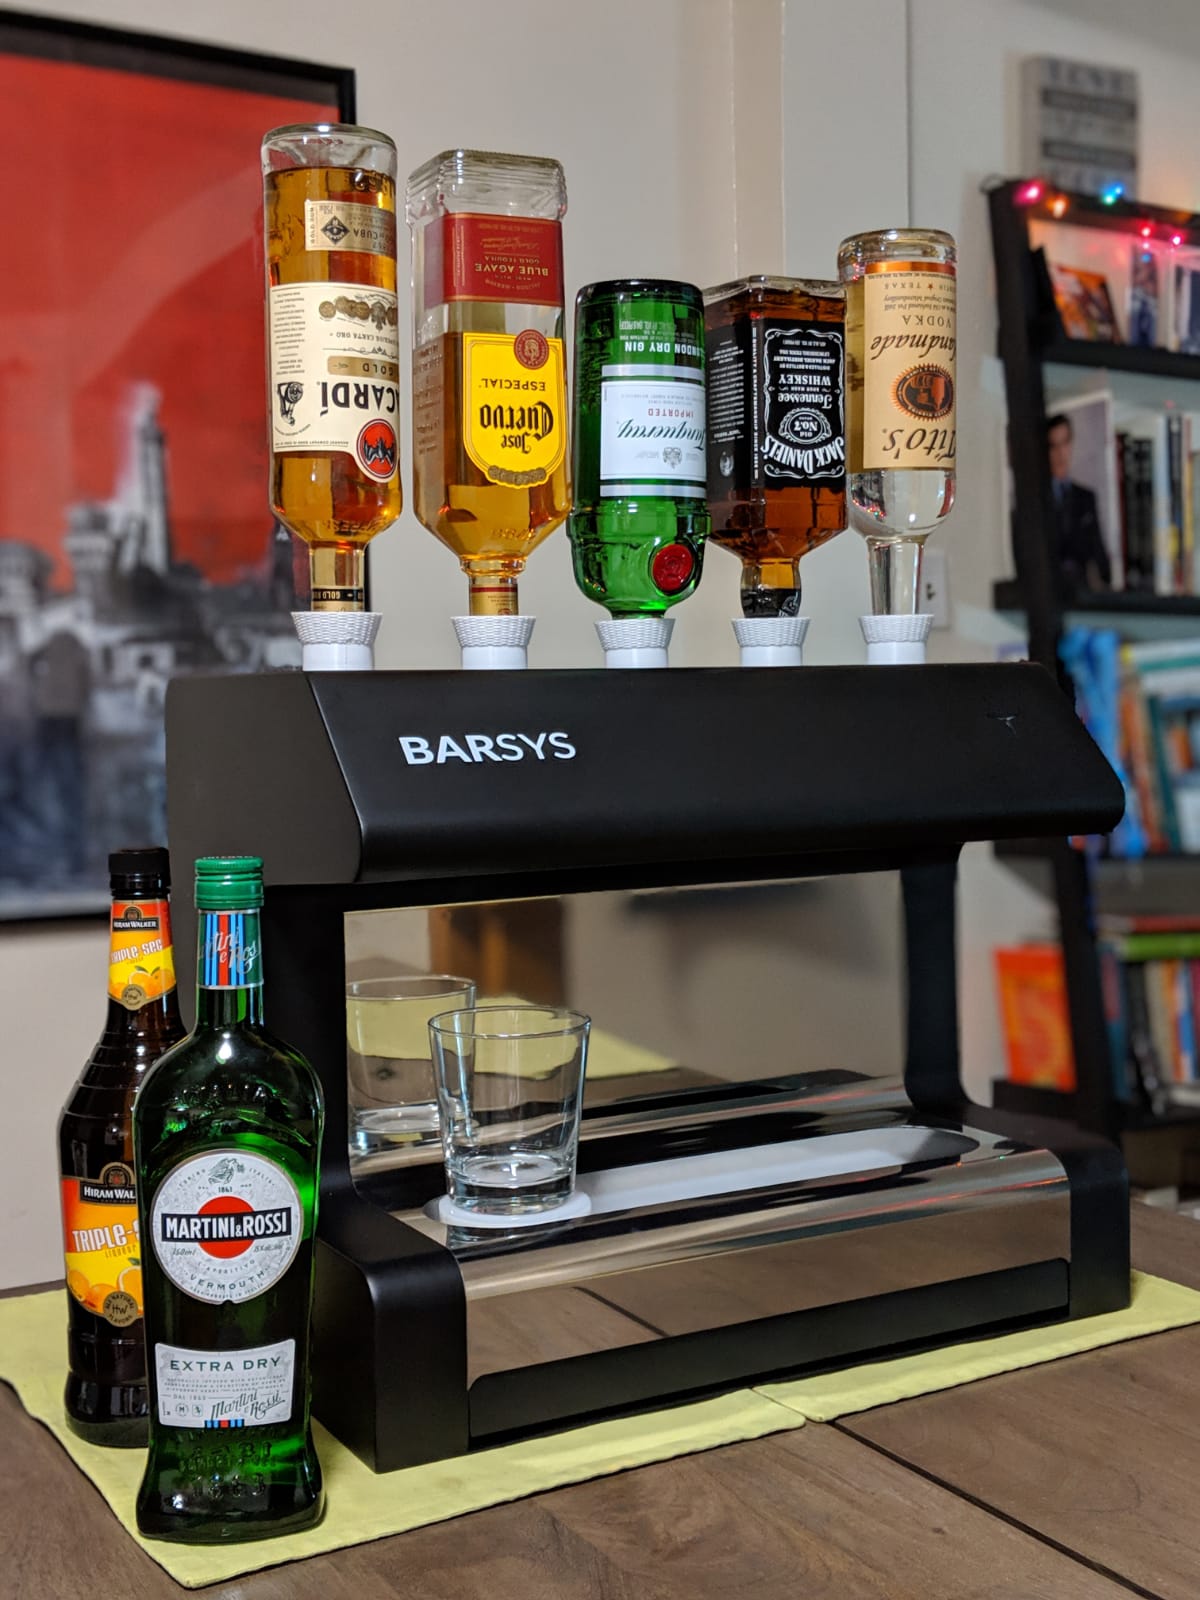 Barsys 2.0 - Fully automatic cocktail maker - Moderst